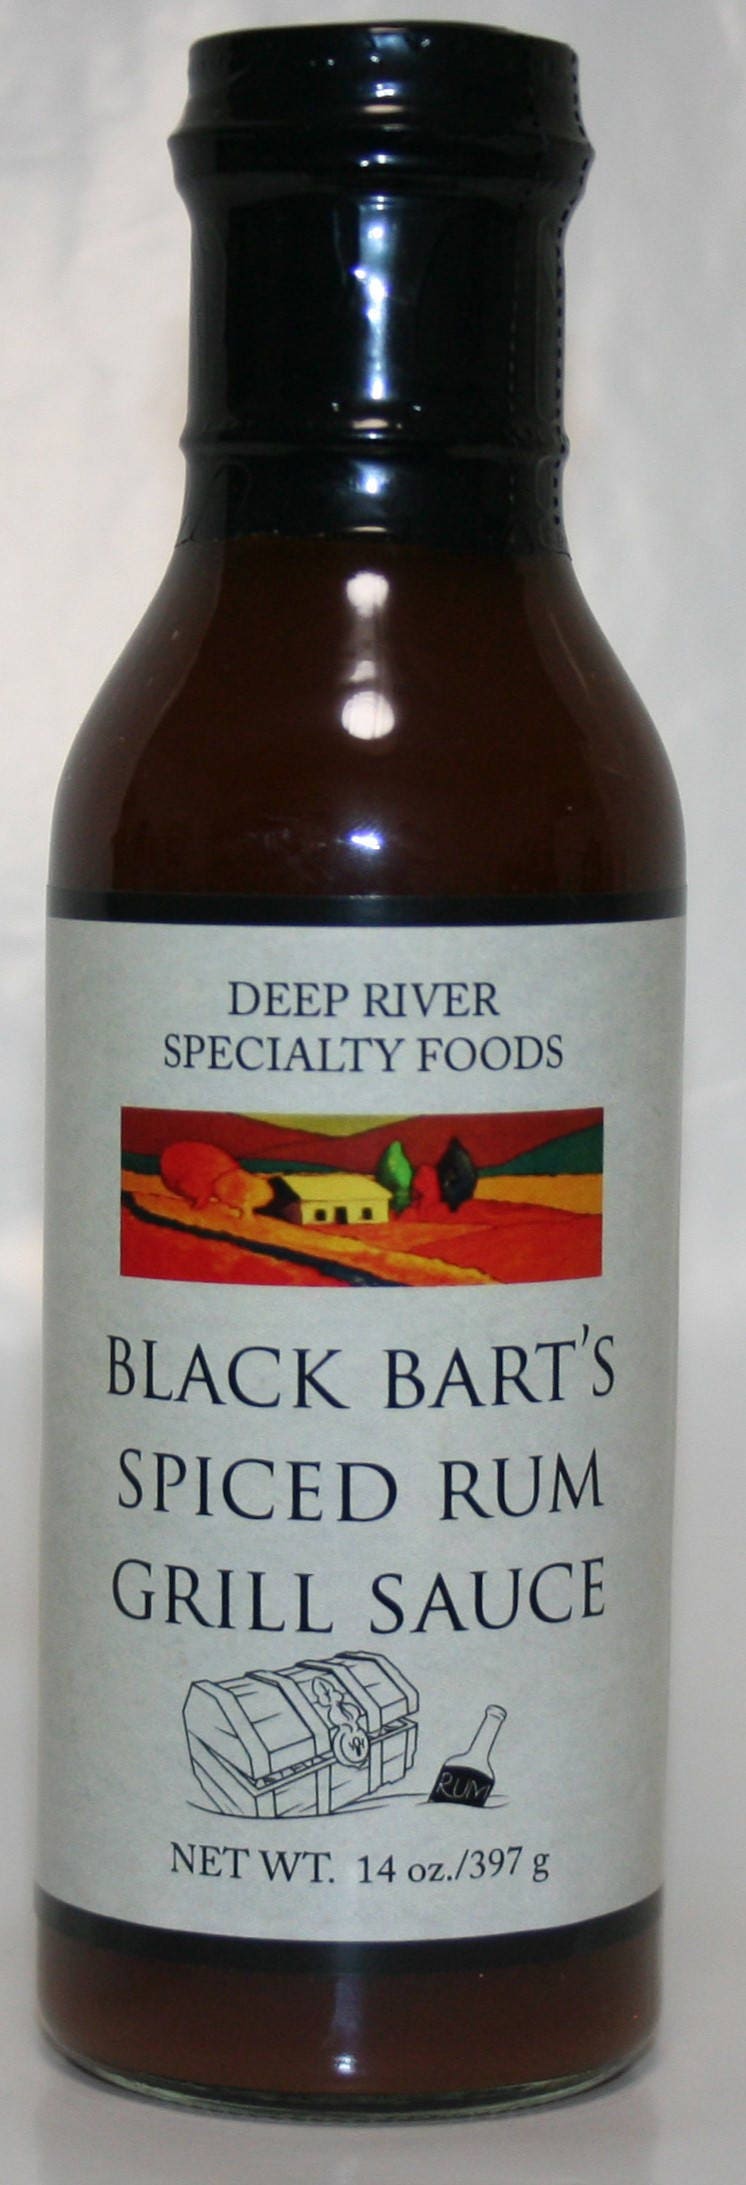 Black Bart's Spiced Rum Grill Sauce